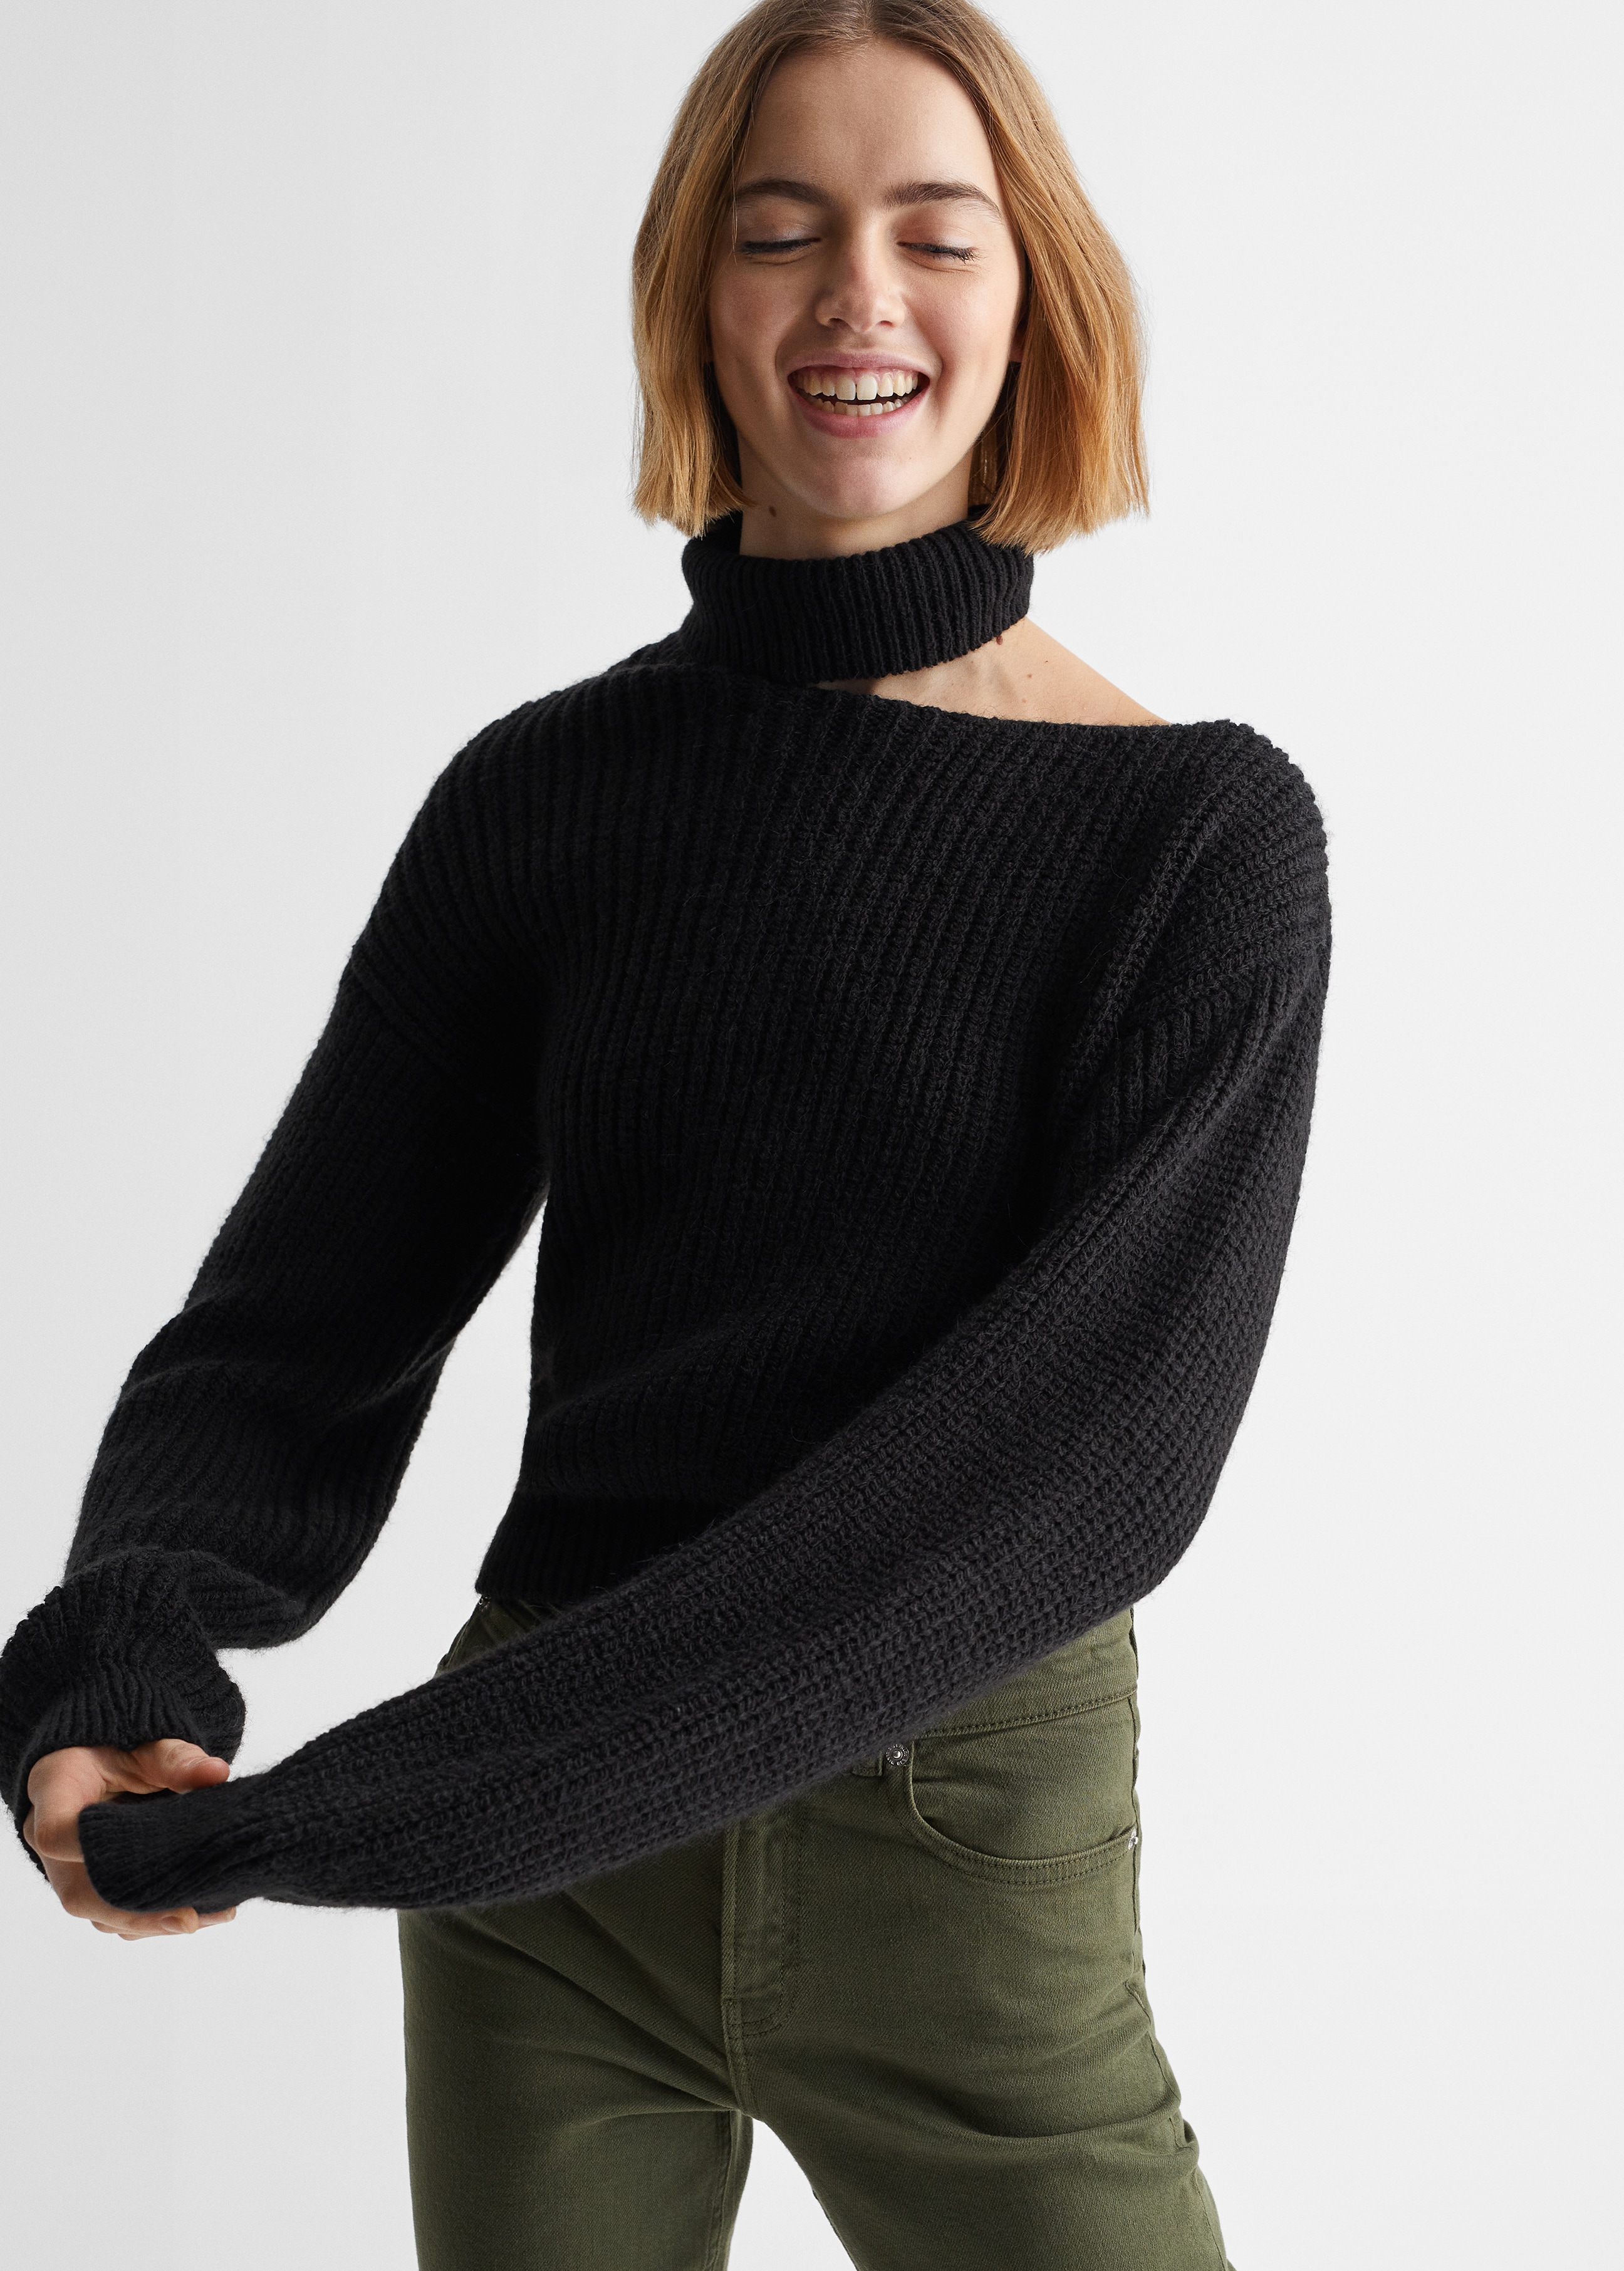 Cut-out neck sweater